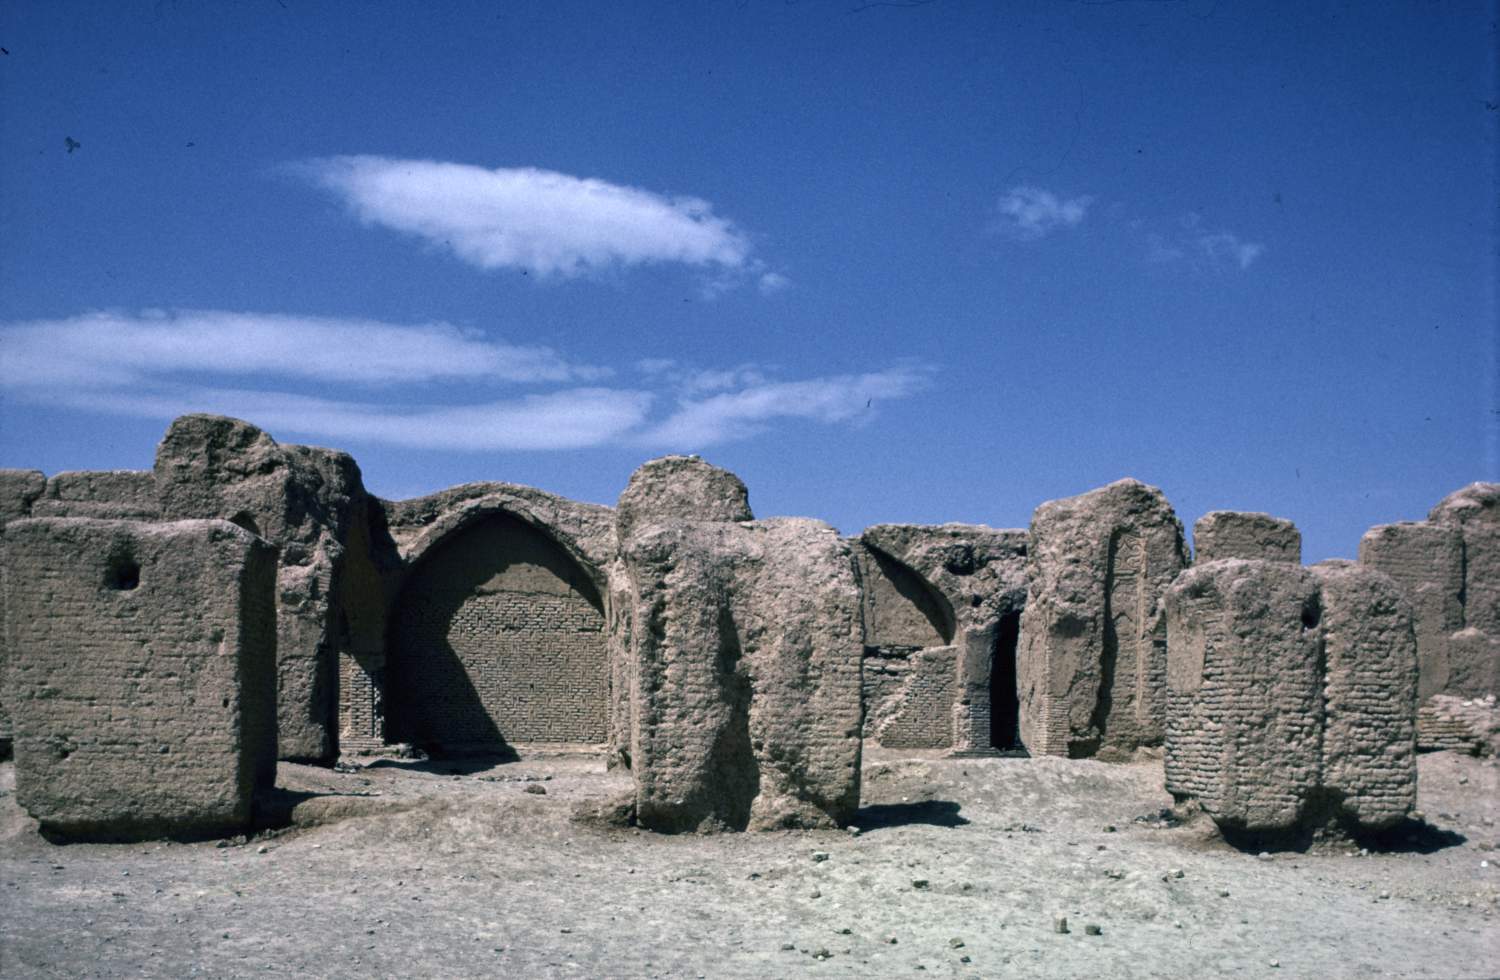 View toward southwestern enclosure wall (qibla wall) with remains of piers in foreground.